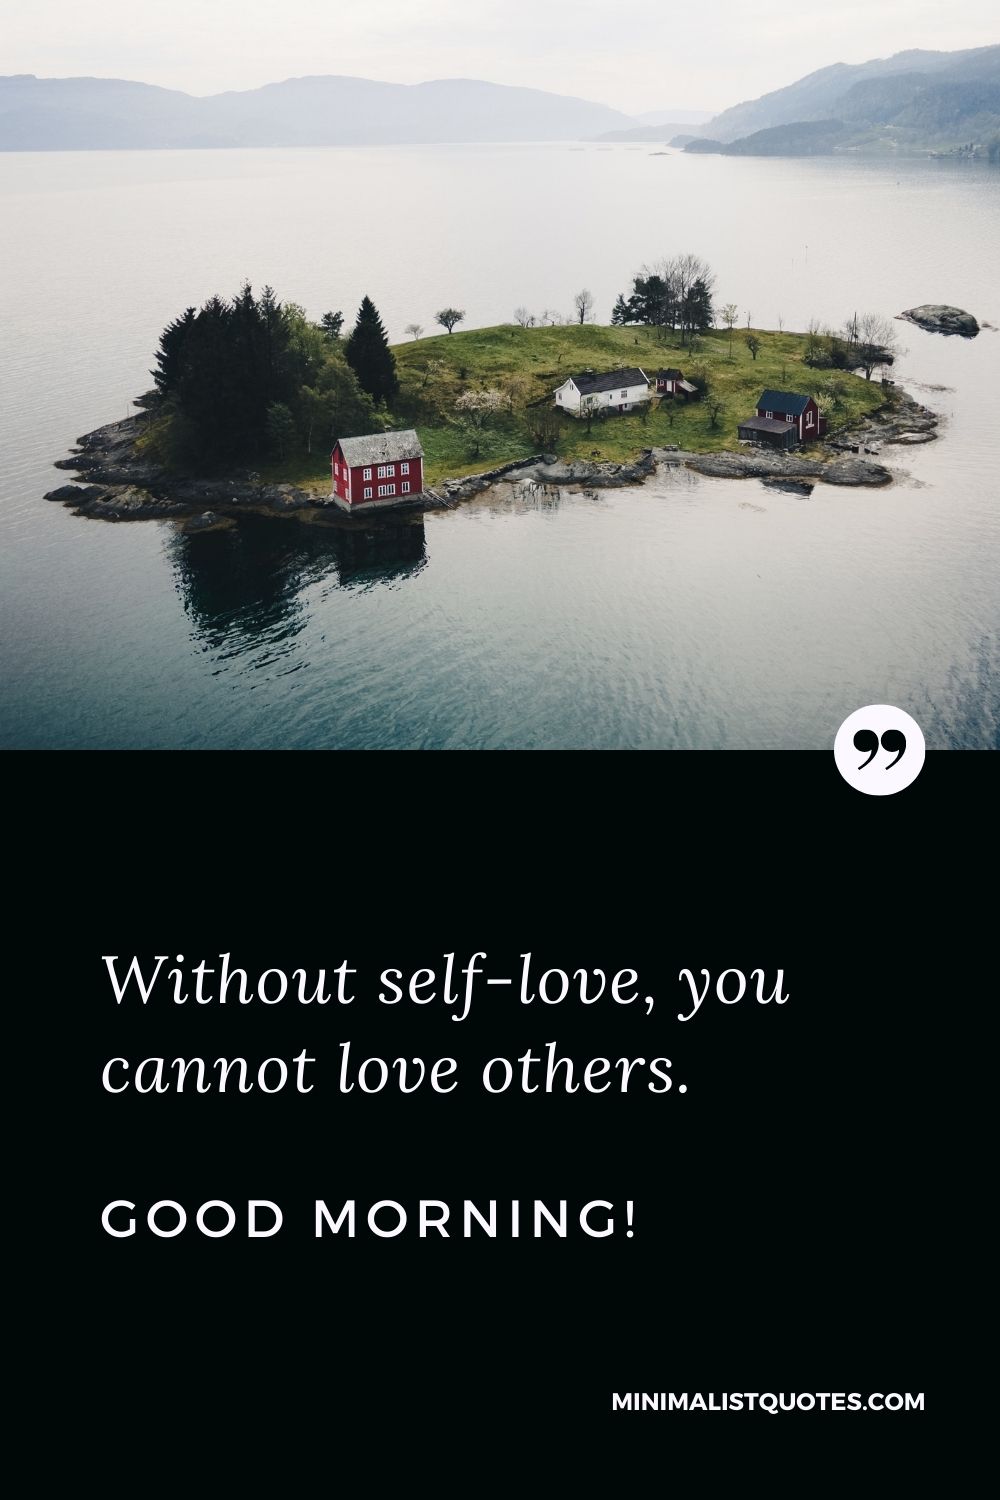 Without self-love, you cannot love others. Good Morning!